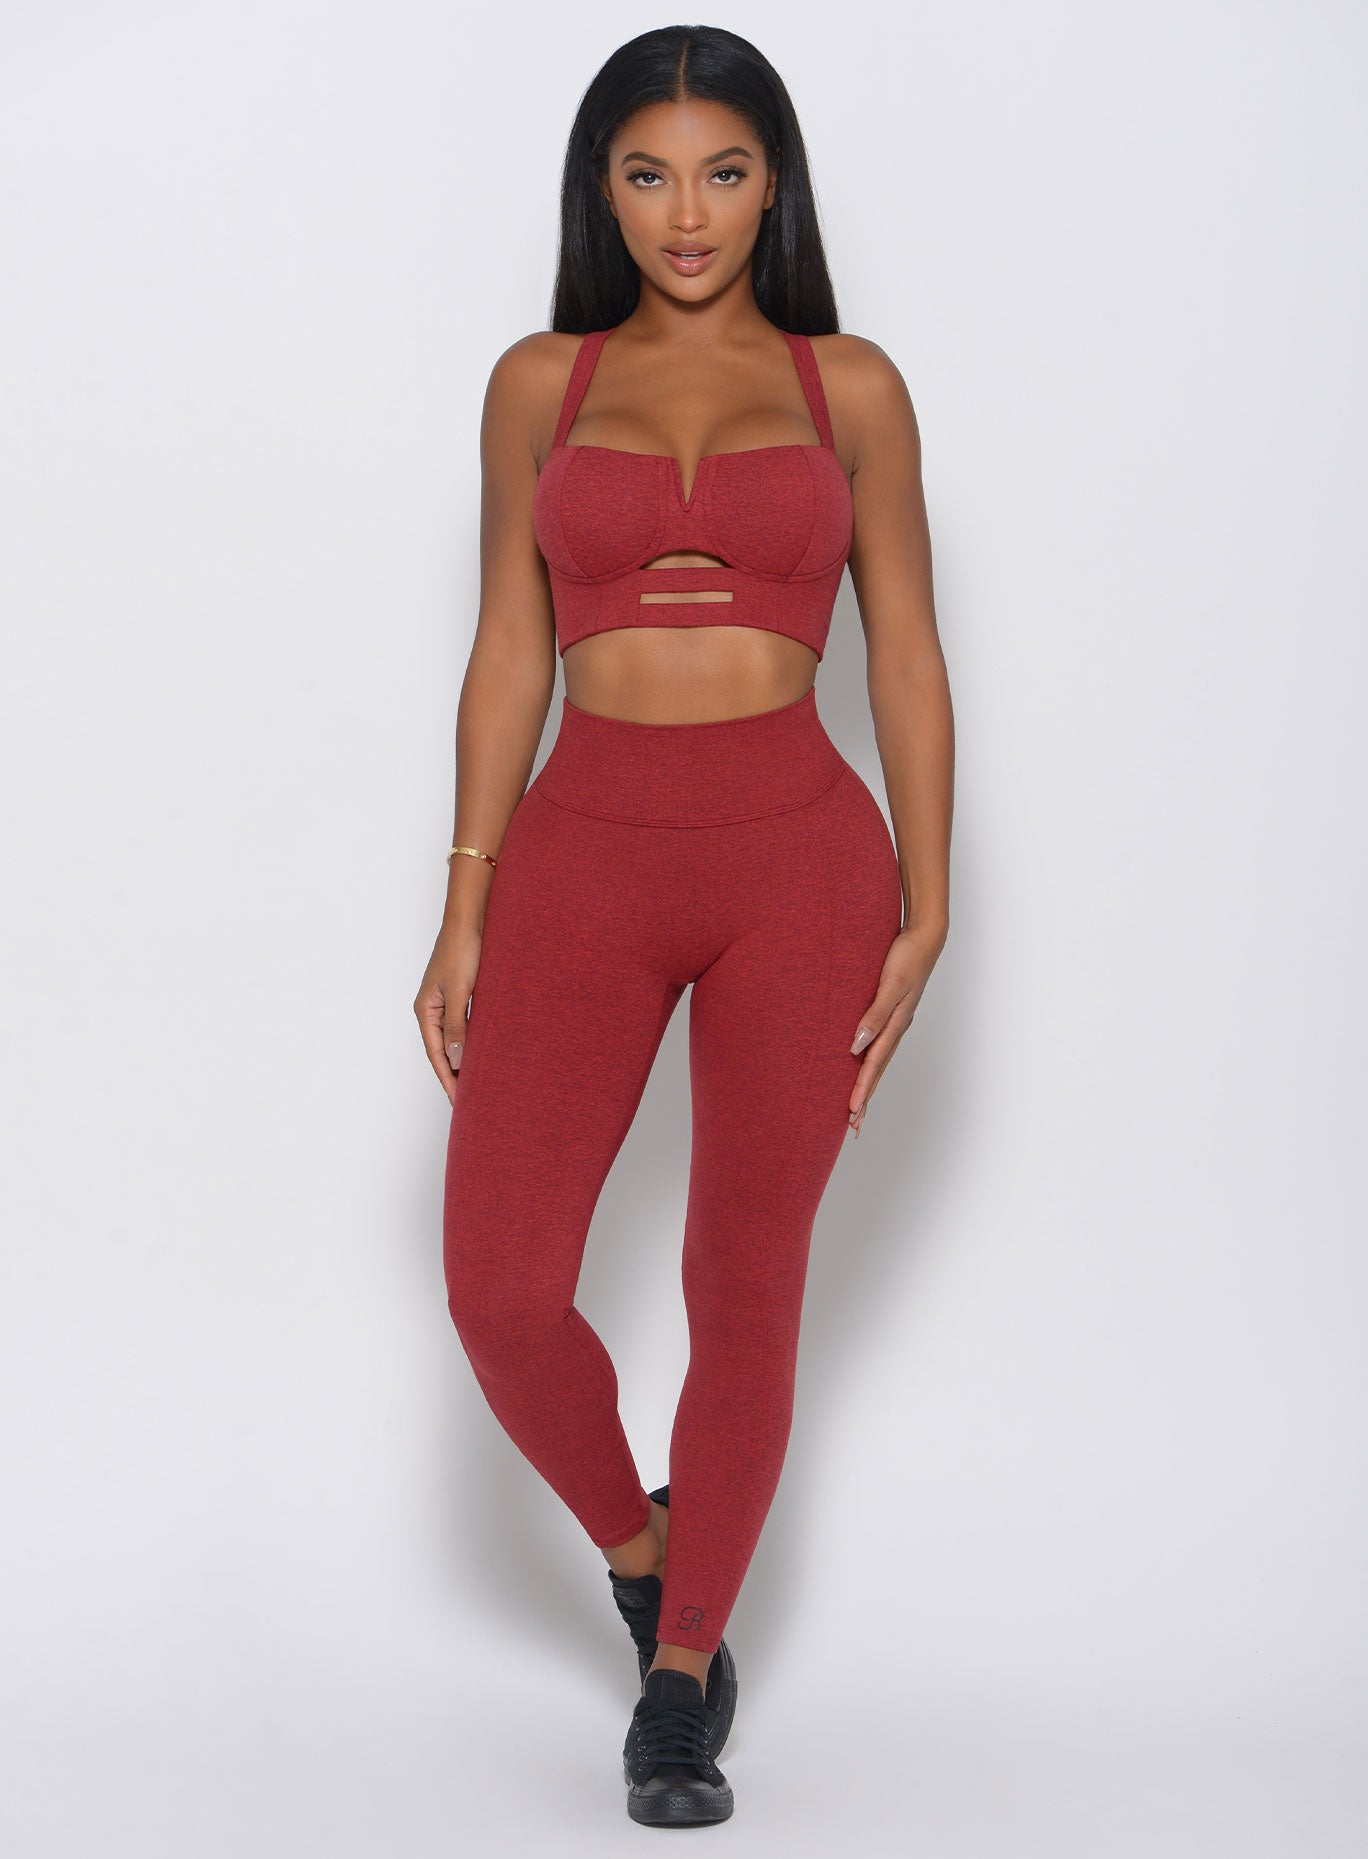 Model facing forward in a red high waist leggings with a V back design